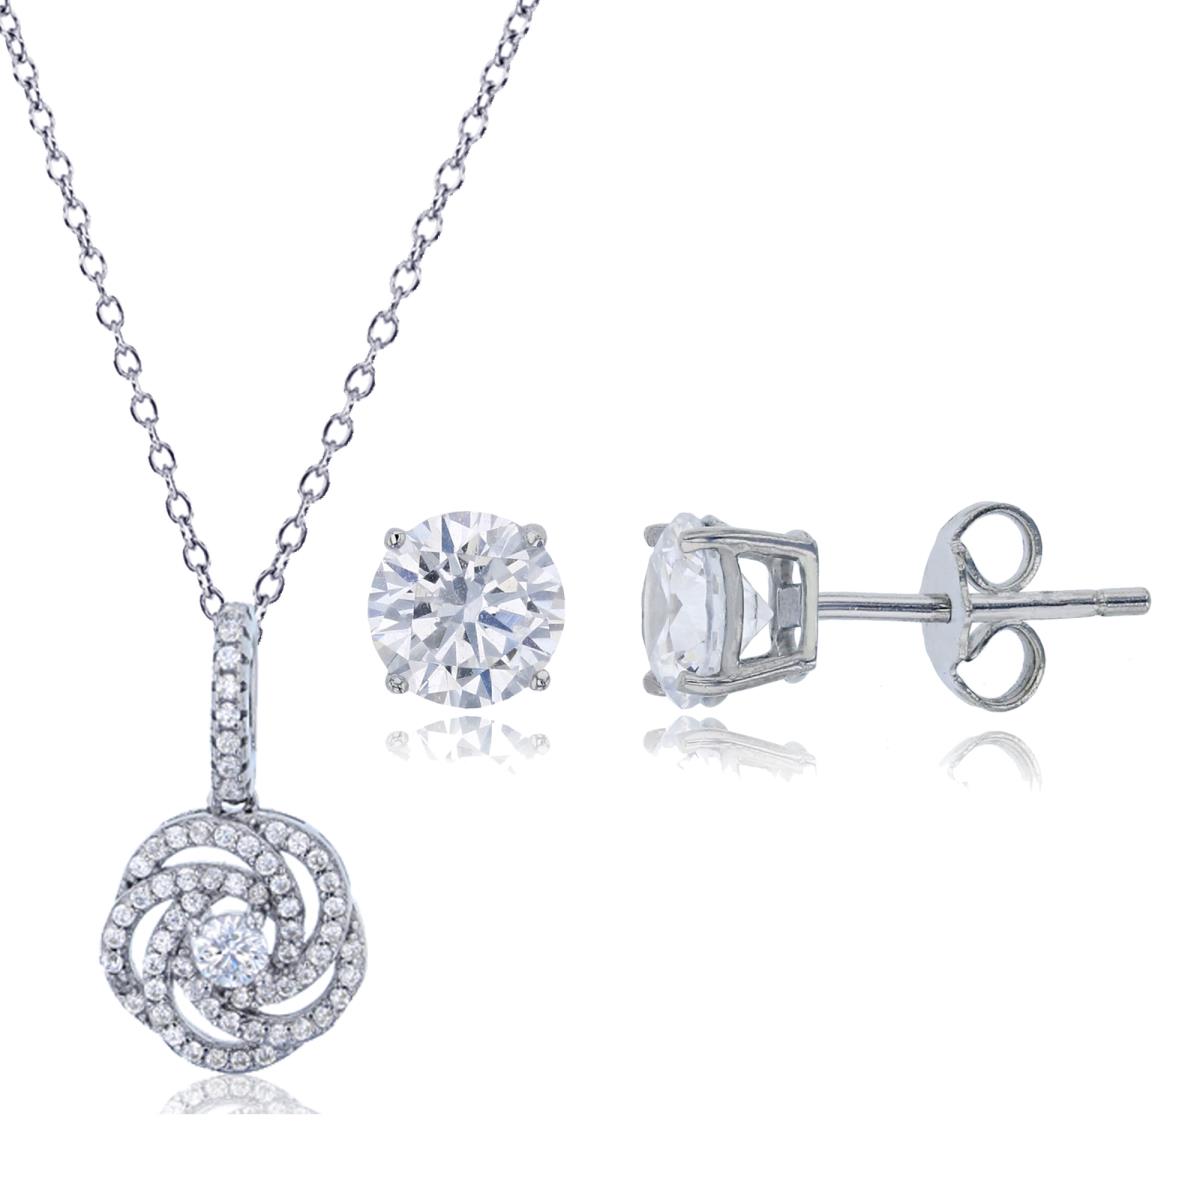 Sterling Silver Rhodium Micropave 3.25 Round Cut Knot 18" Necklace & 6mm Rd Solitaire Stud Earring Set